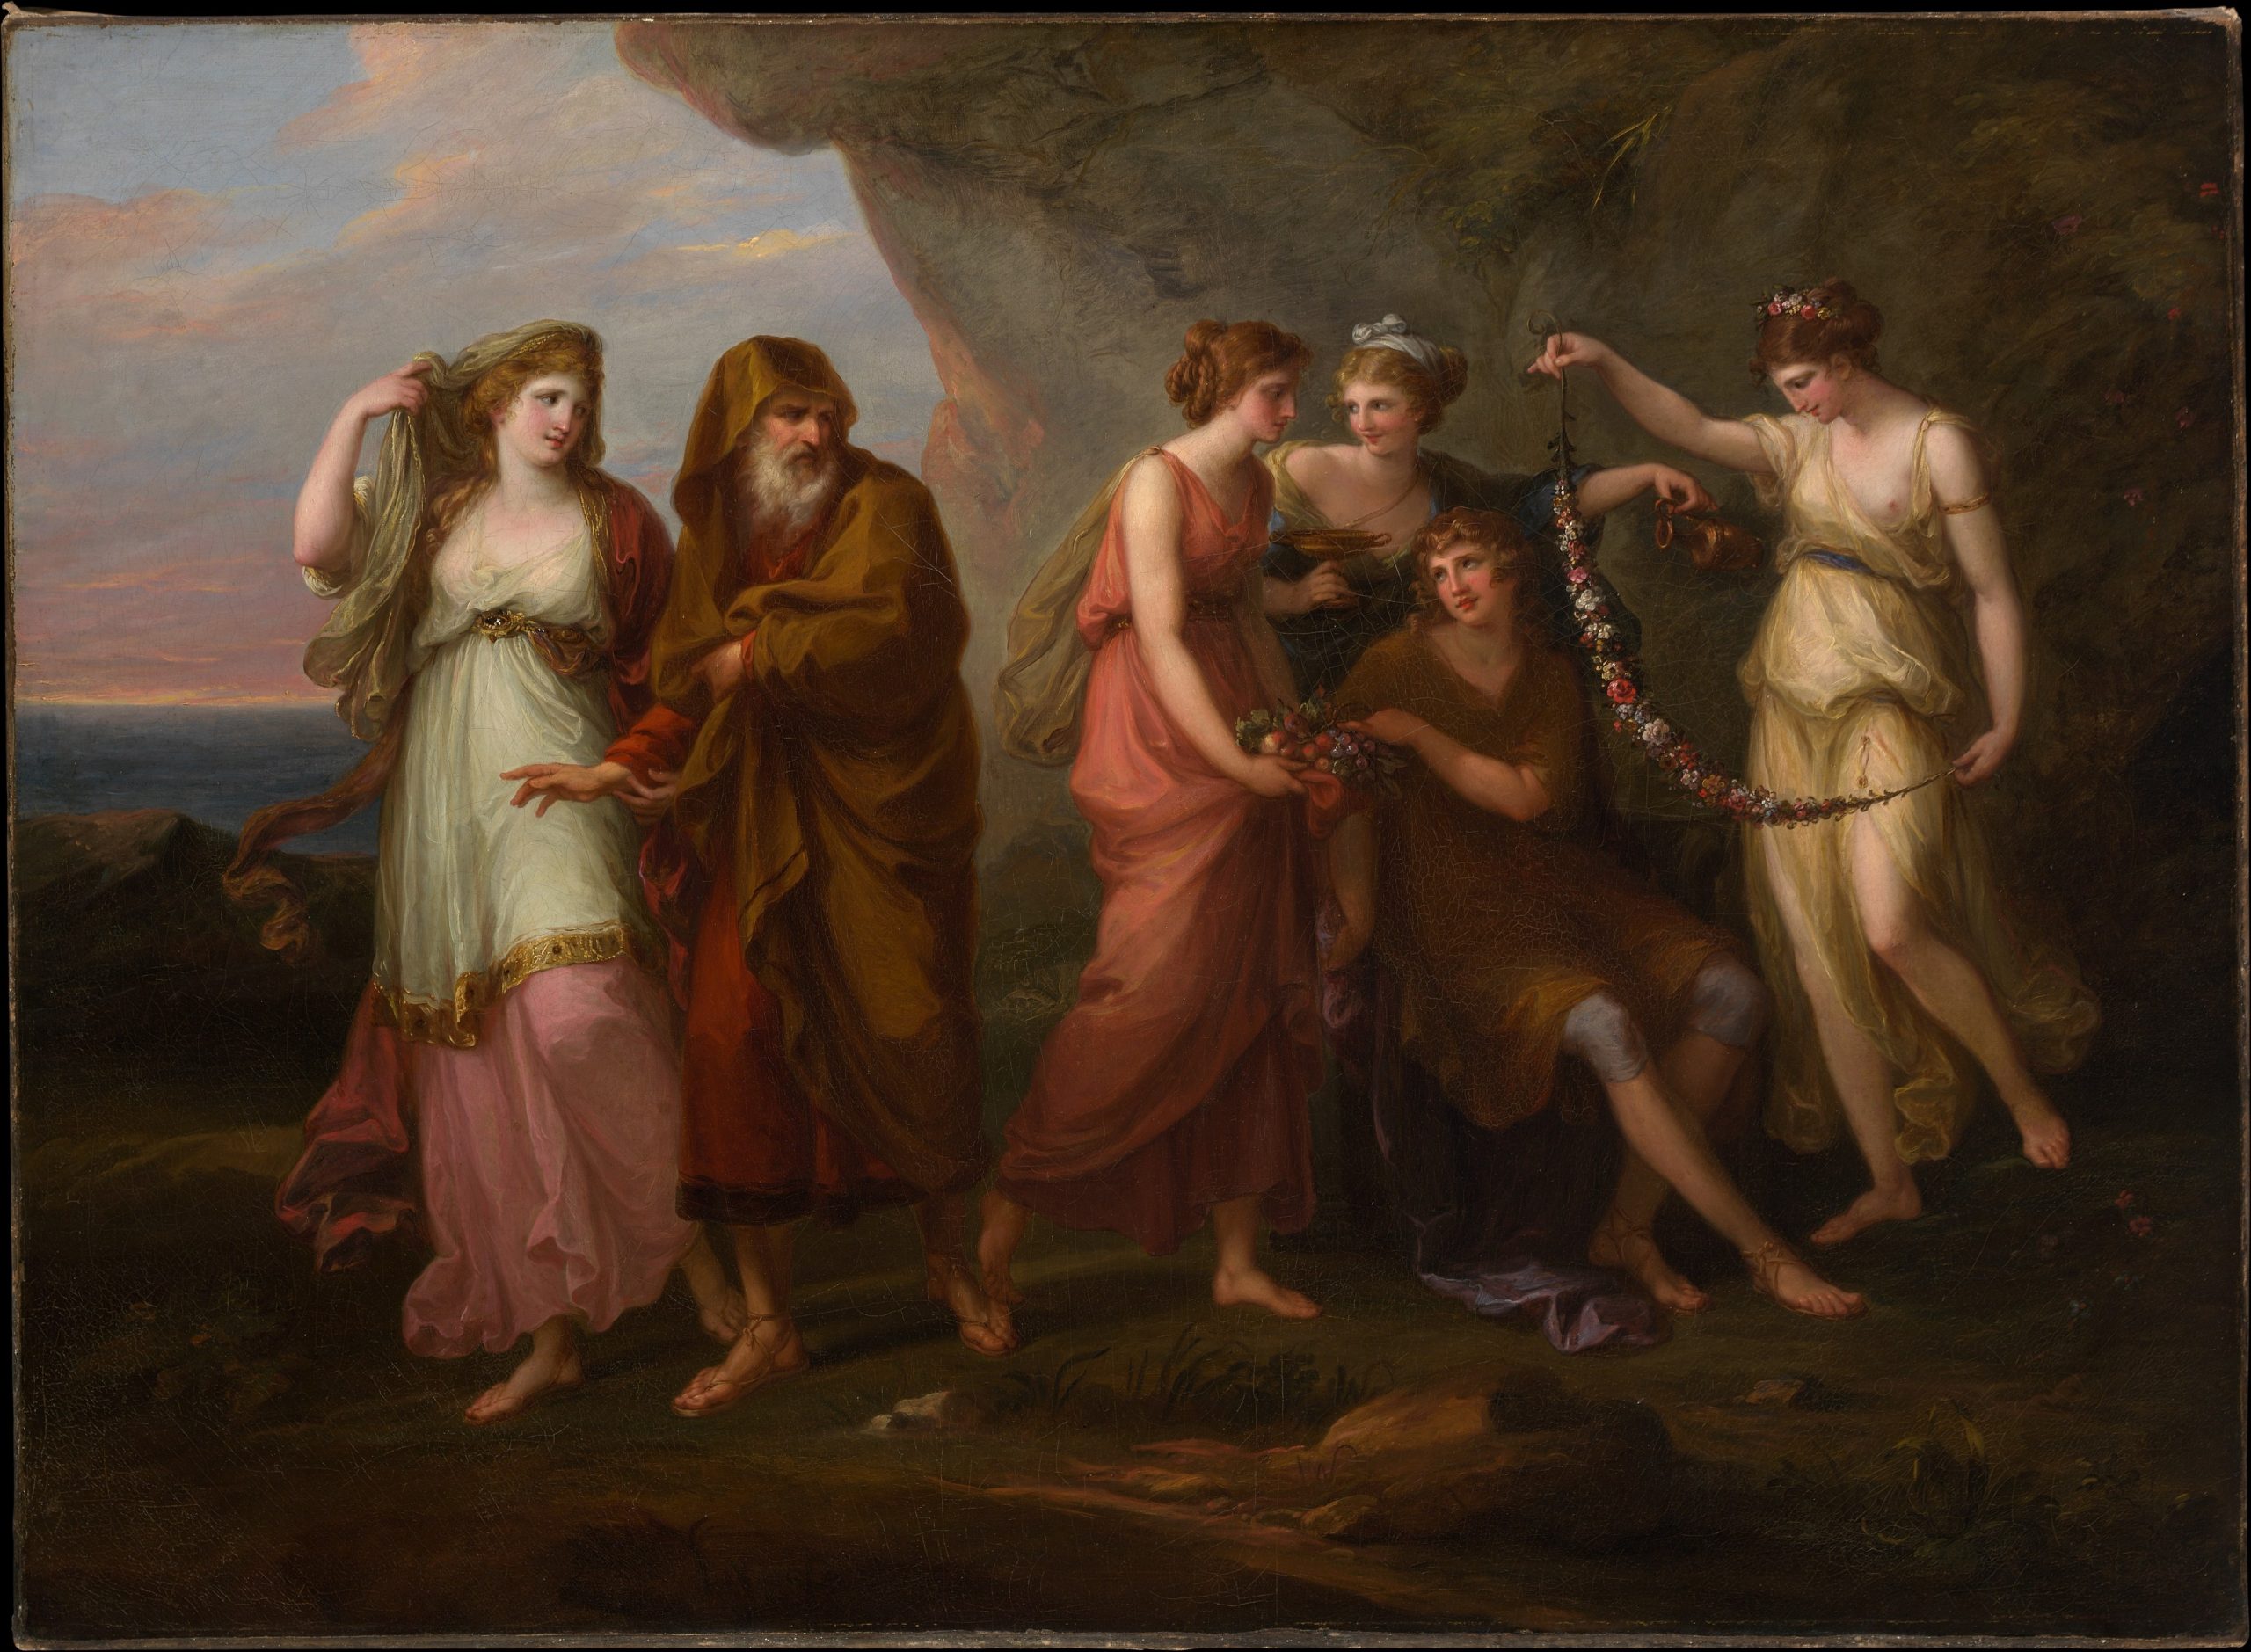 A painting of five women dressed in whimsical garb of varying colours. The women are accompanied by one man dressed in a long brown hooded cloak.